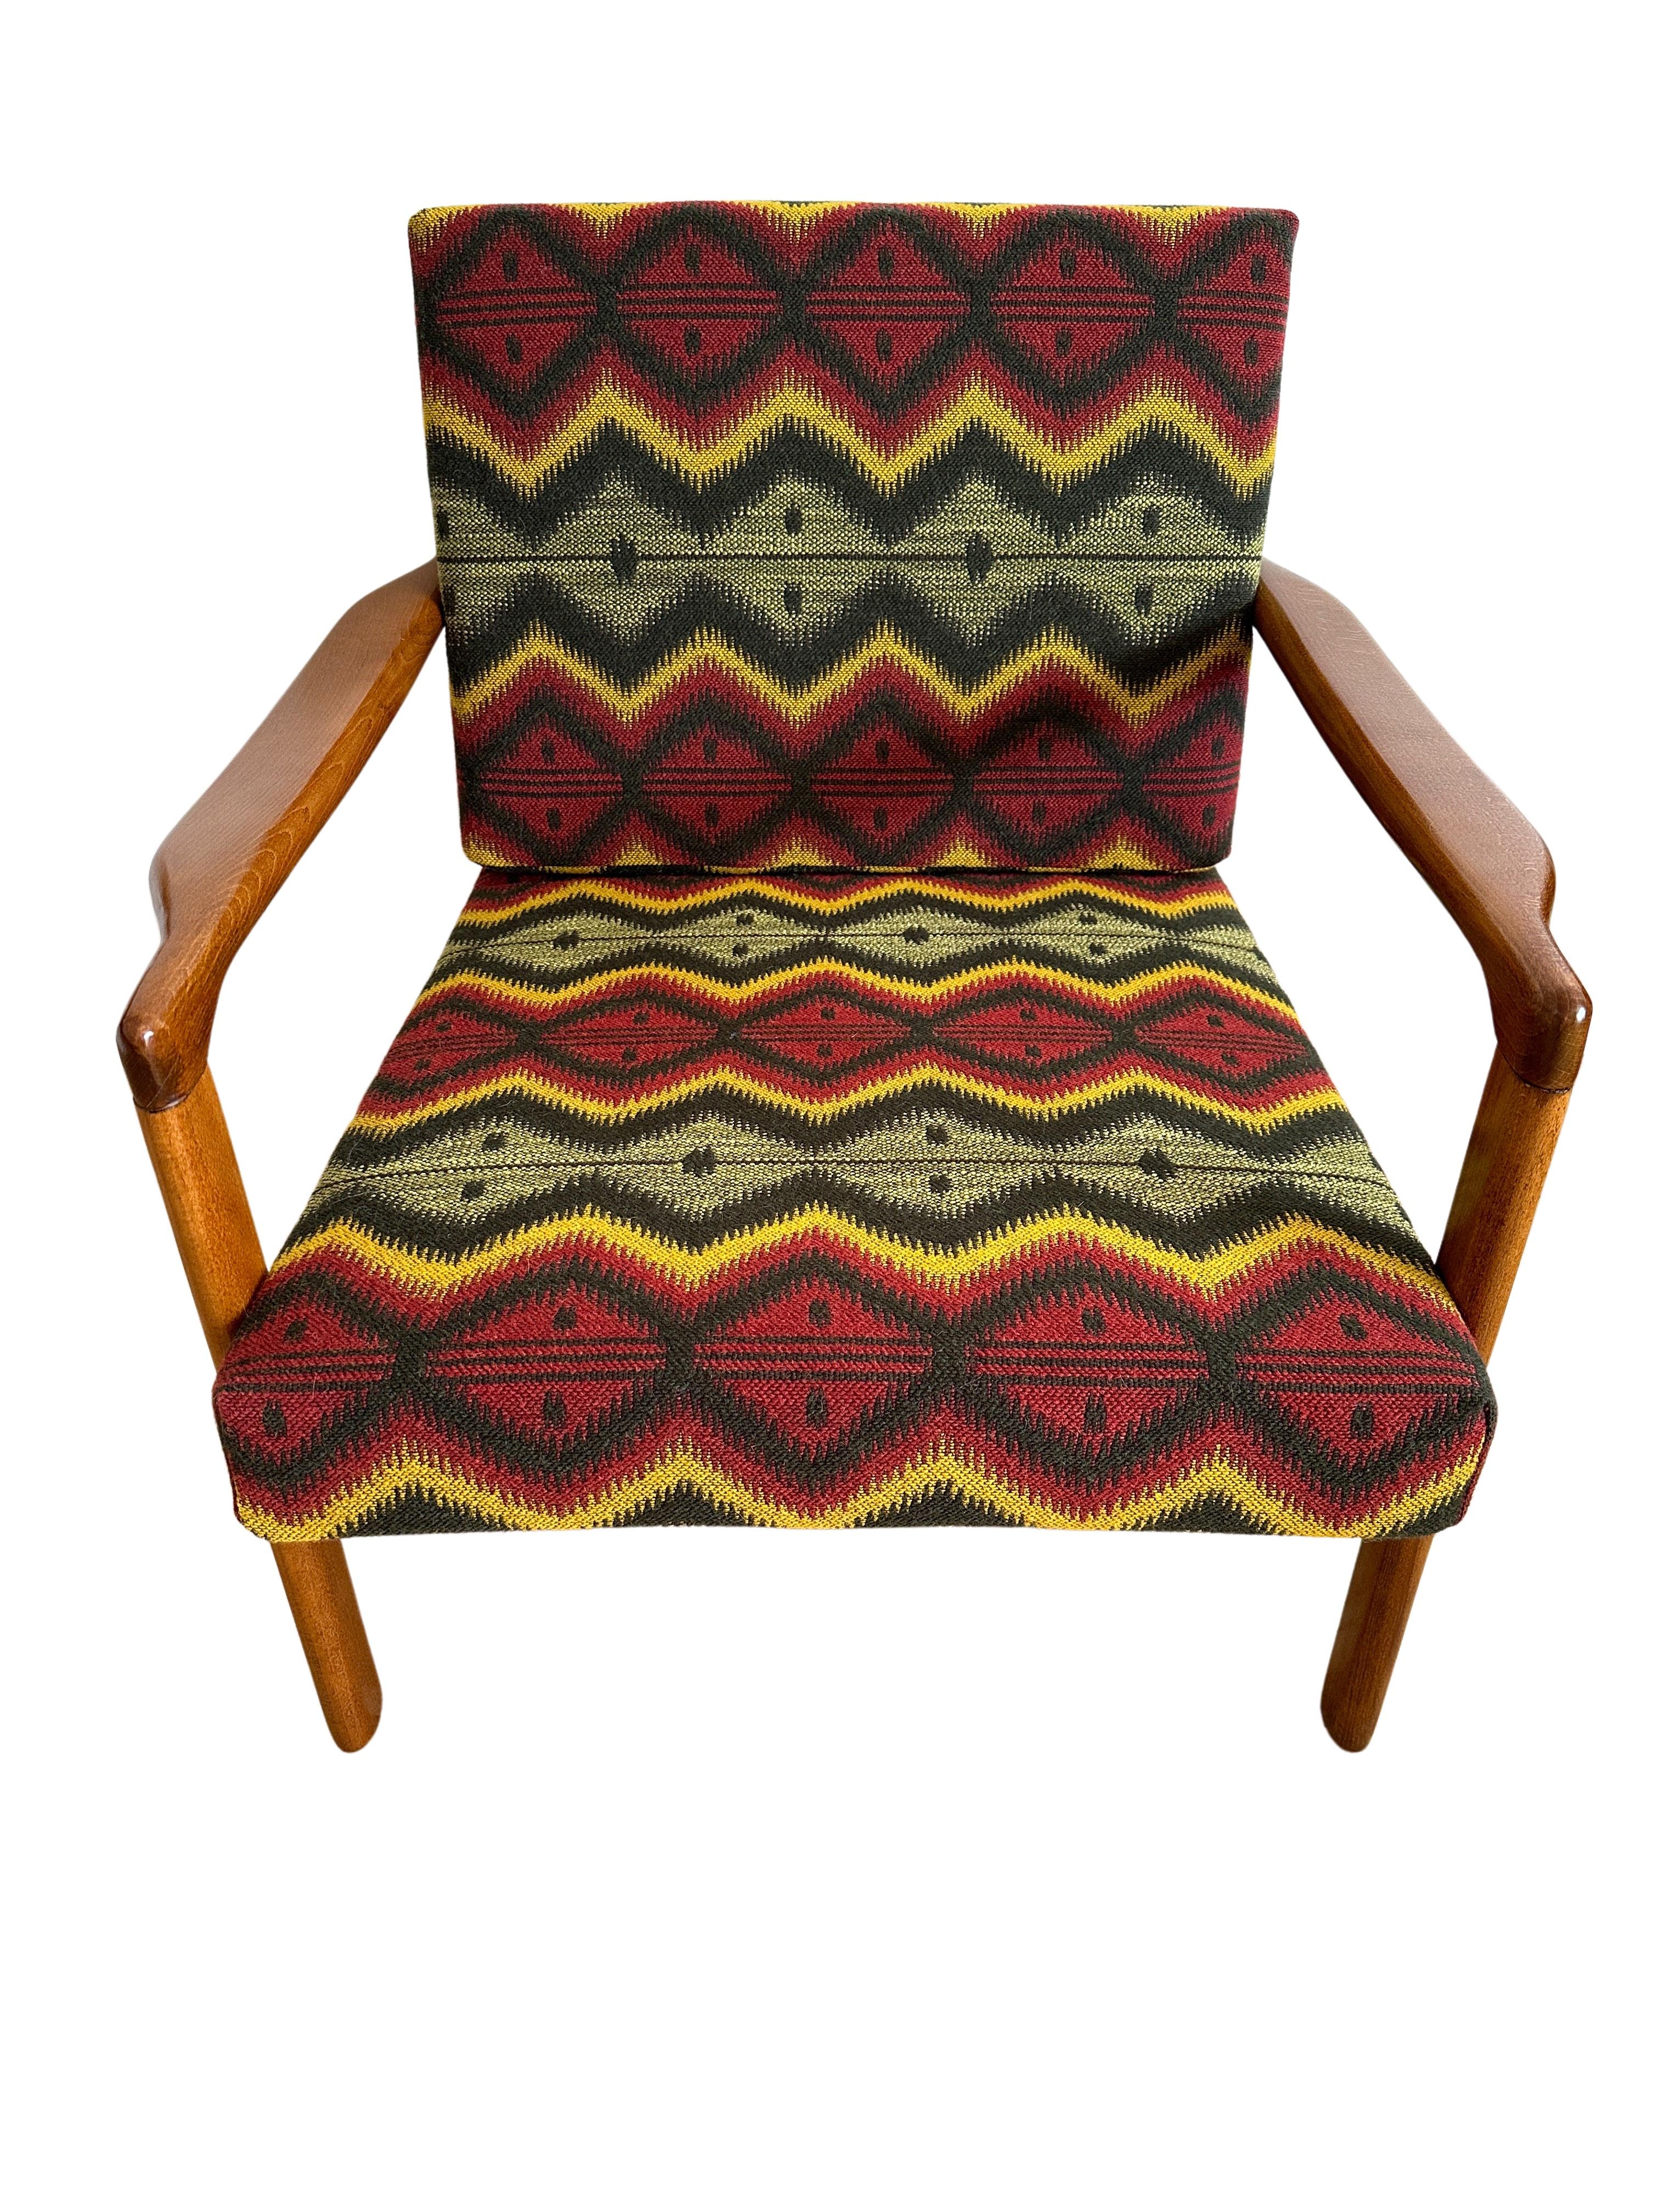 Mid-Century Modern Midcentury Armchair by Zenon Bączyk, Mind the Gap Upholstery, Europe, 1960s For Sale